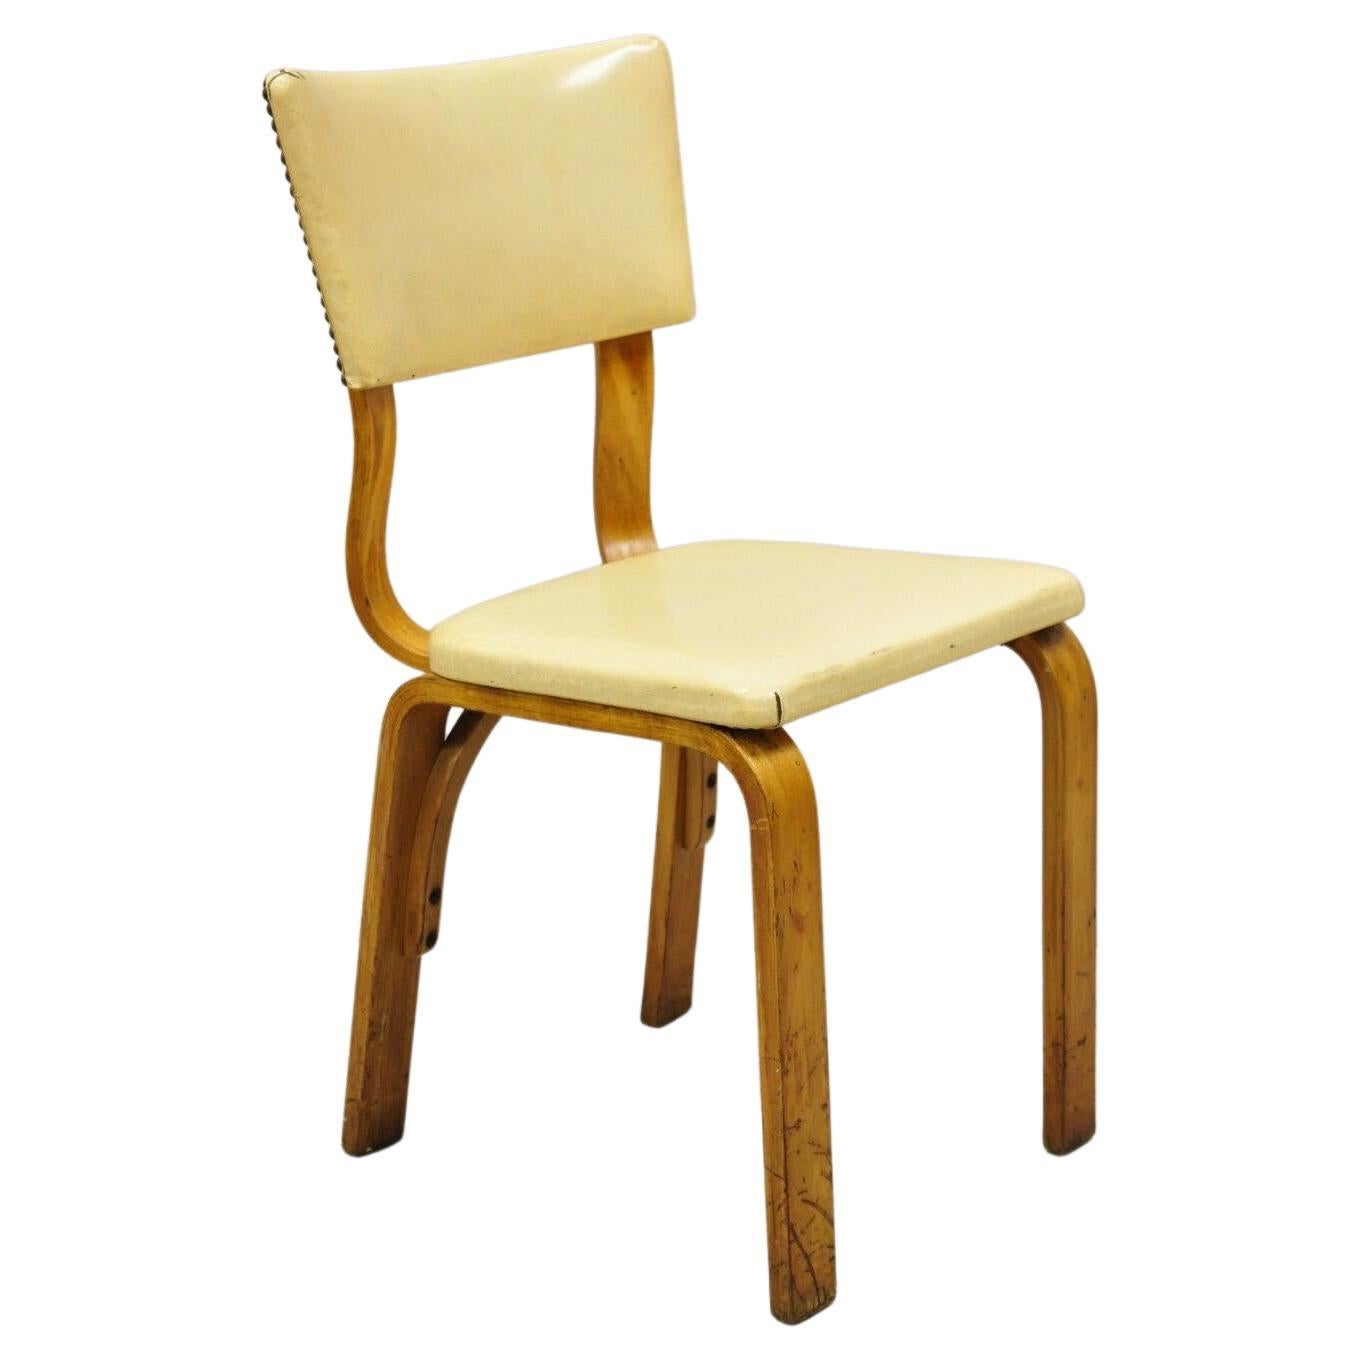 Vintage Thonet Bentwood Dining Side Chair with Beige Vinyl Seat